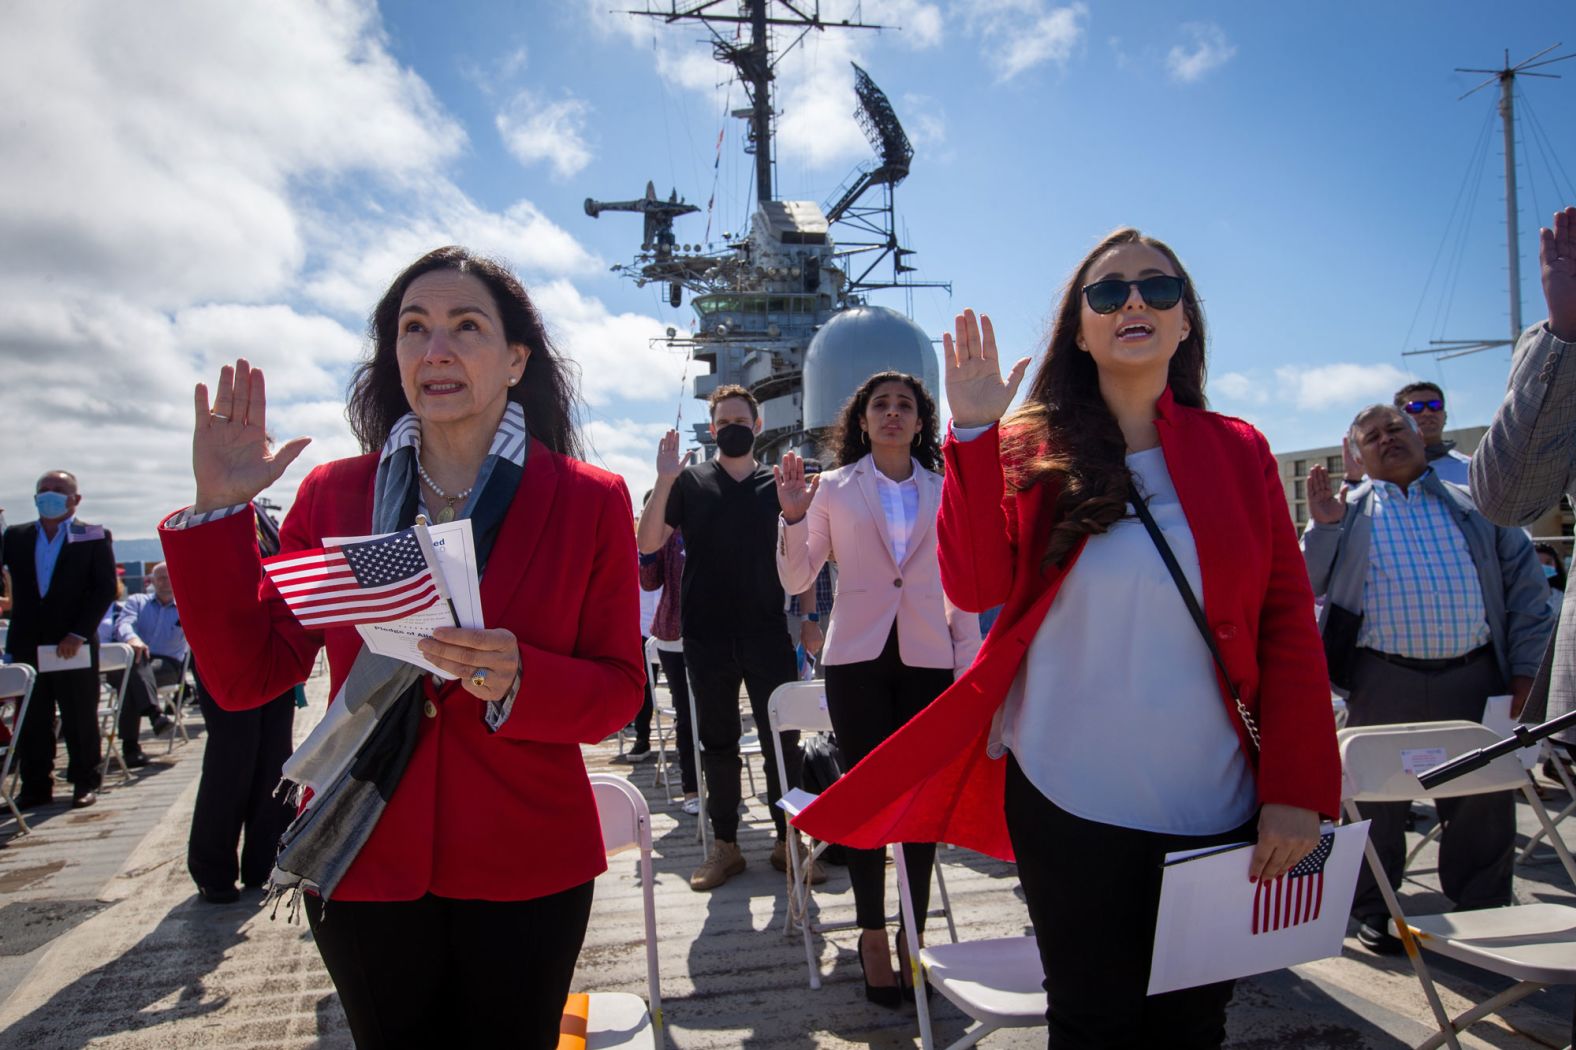 Maria Laura Limpias Chavez, left, of Bolivia, Sahara Loffsner, of Colombia, and fellow new American citizens, take the Oath of Allegiance during a naturalization ceremony on the flight deck of the USS Hornet Museum in Alameda, California, on Friday, July 2.